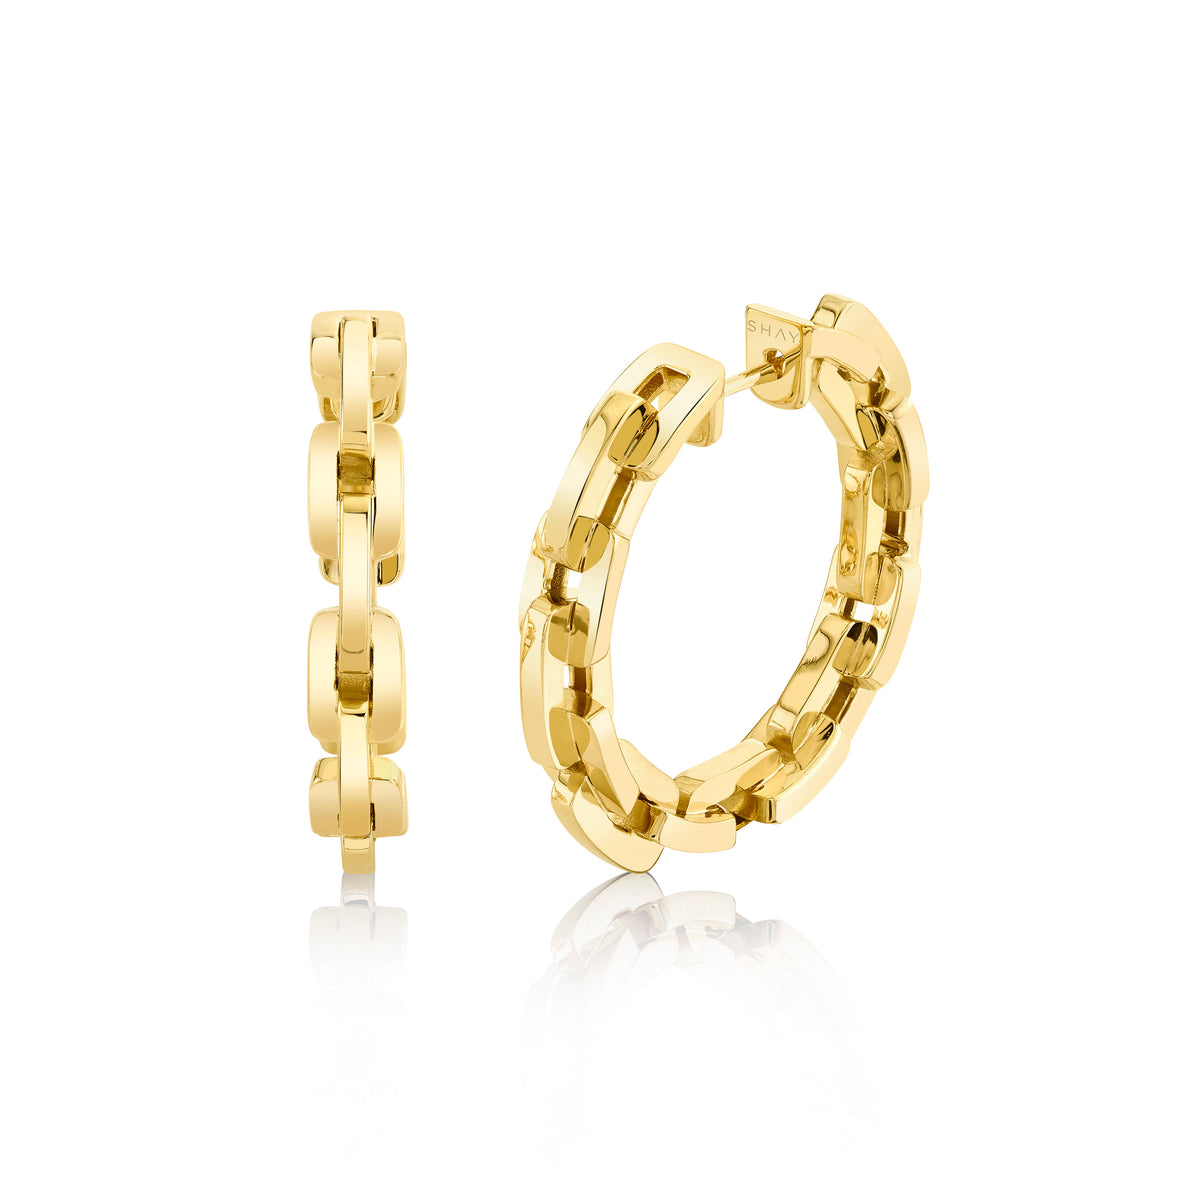 SOLID GOLD MINI DECO LINK HOOPS